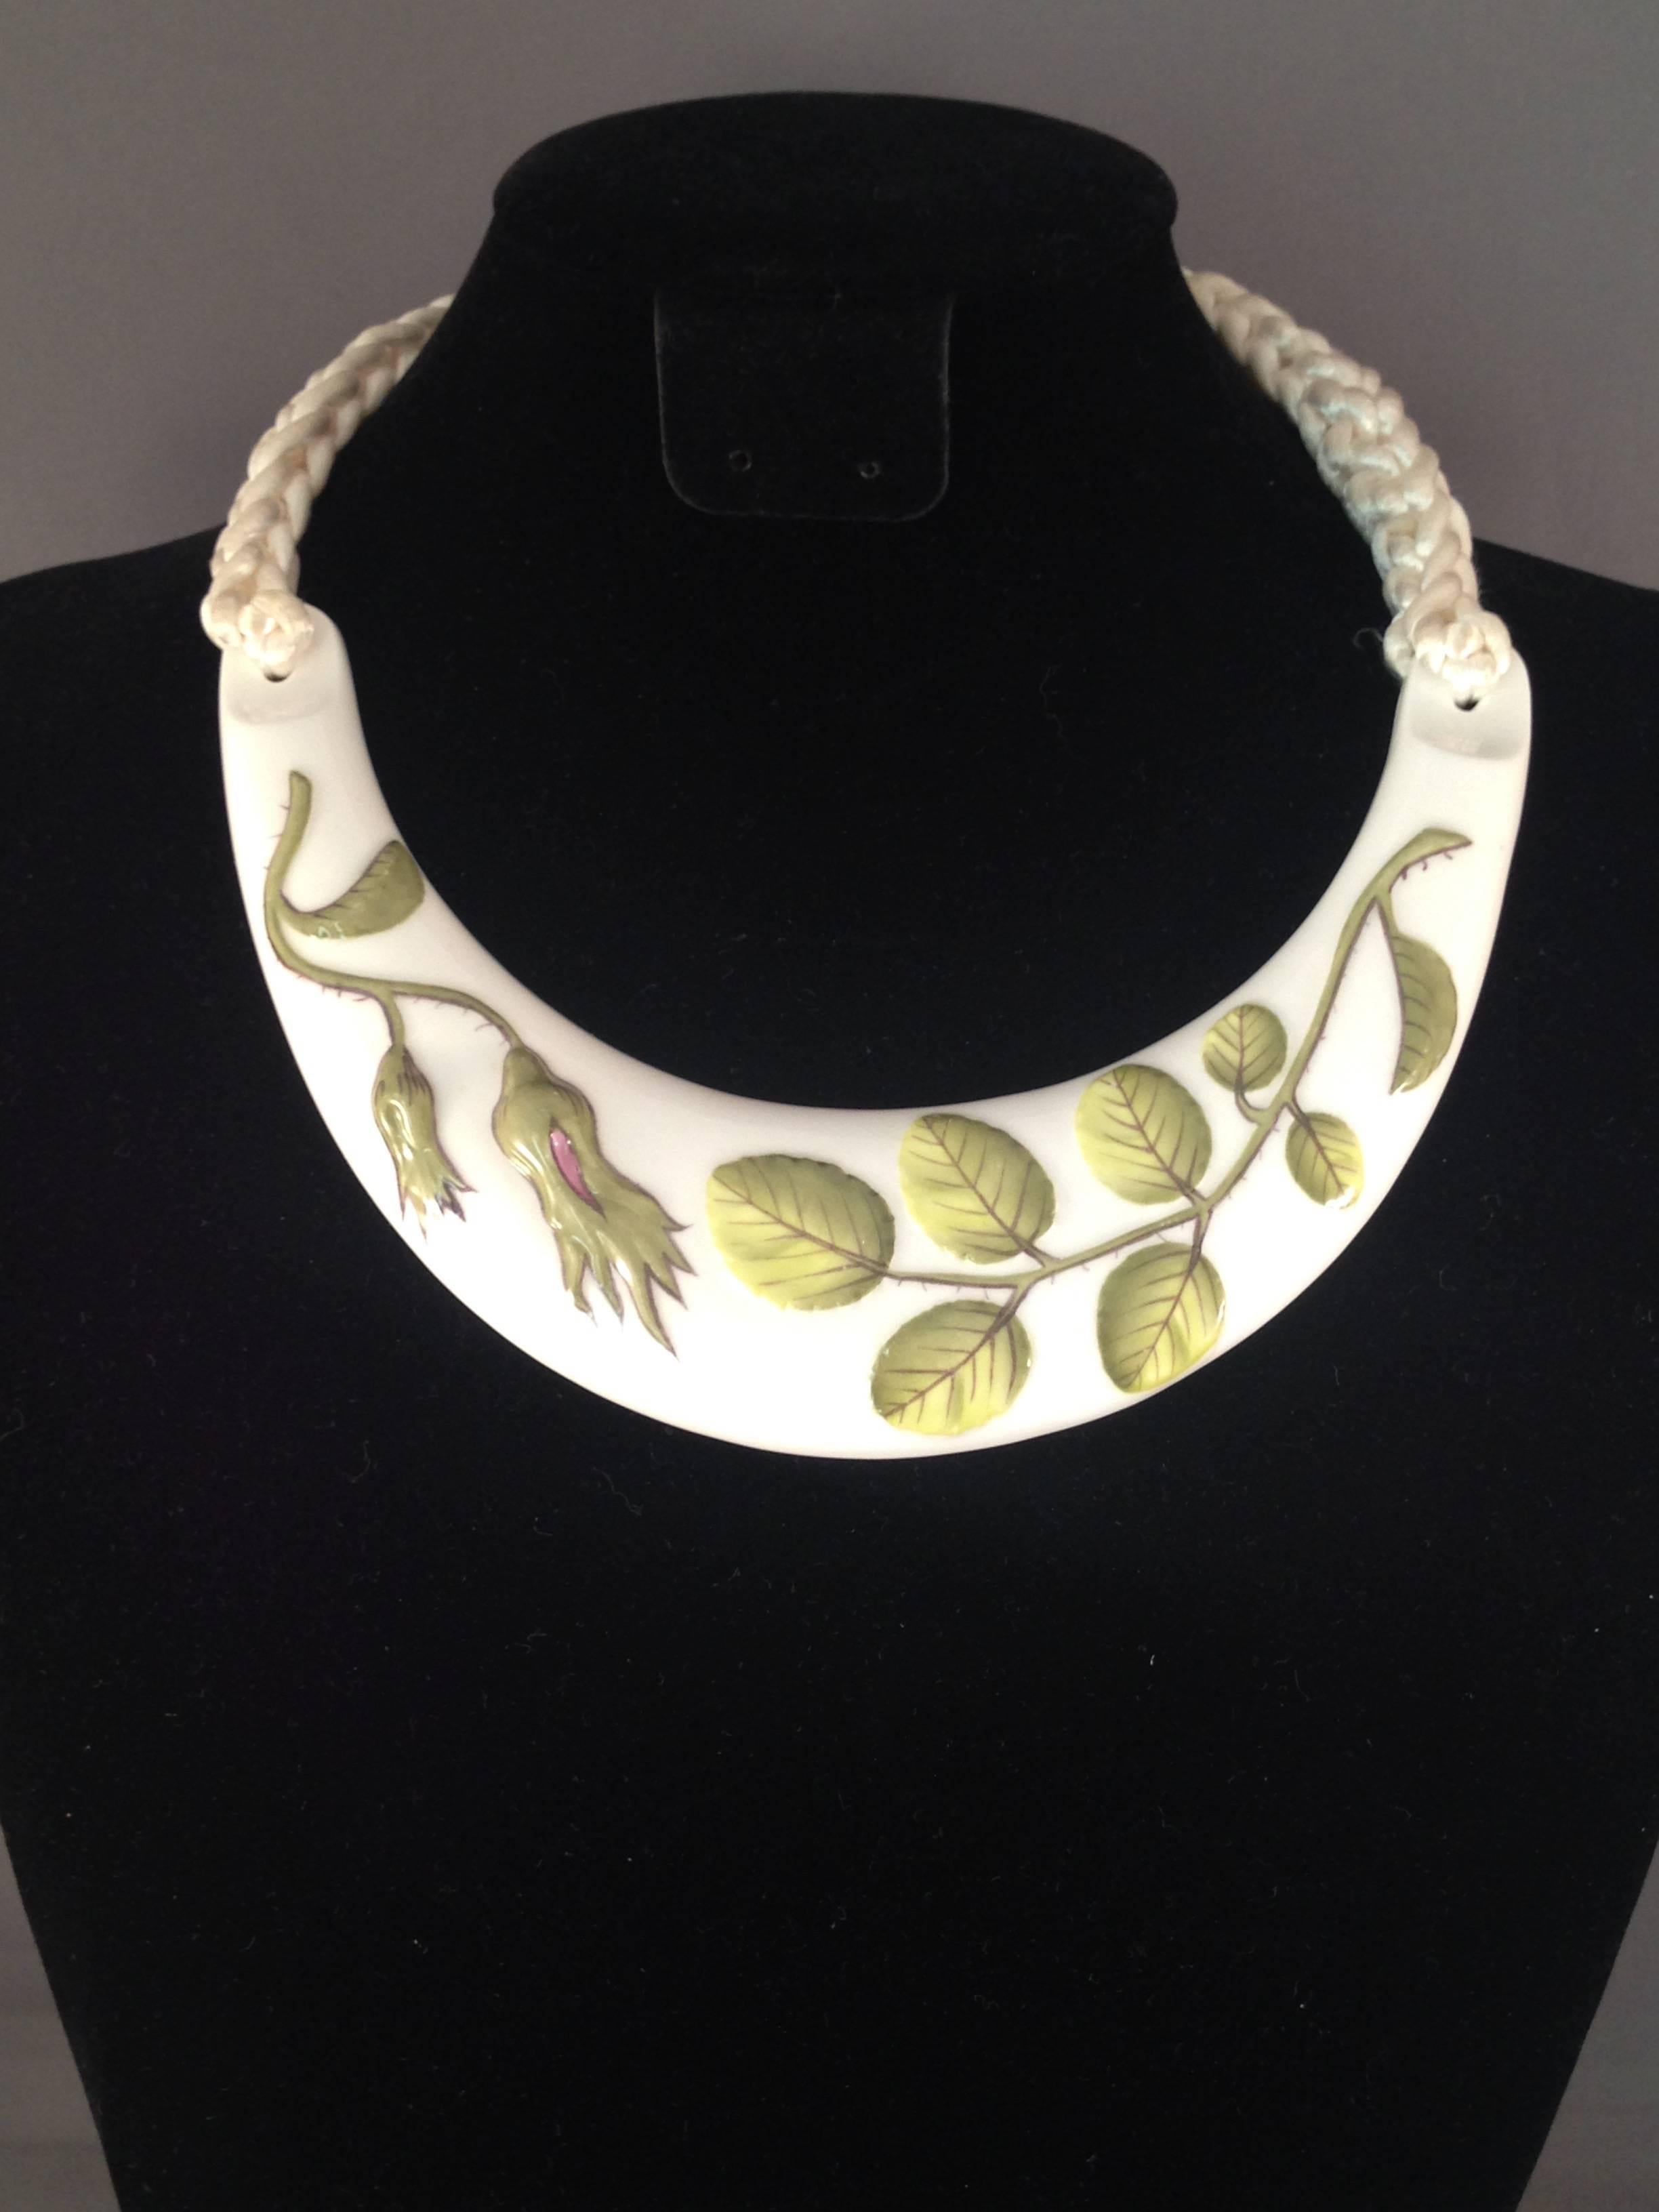 This is a rare bone china necklace designed by Kenneth Jay Lane for the Royal Worchester Company in 1976. Lane went to the Royal Worchester headquarters in England and chose several of their classic bone china patterns to fashion into collar